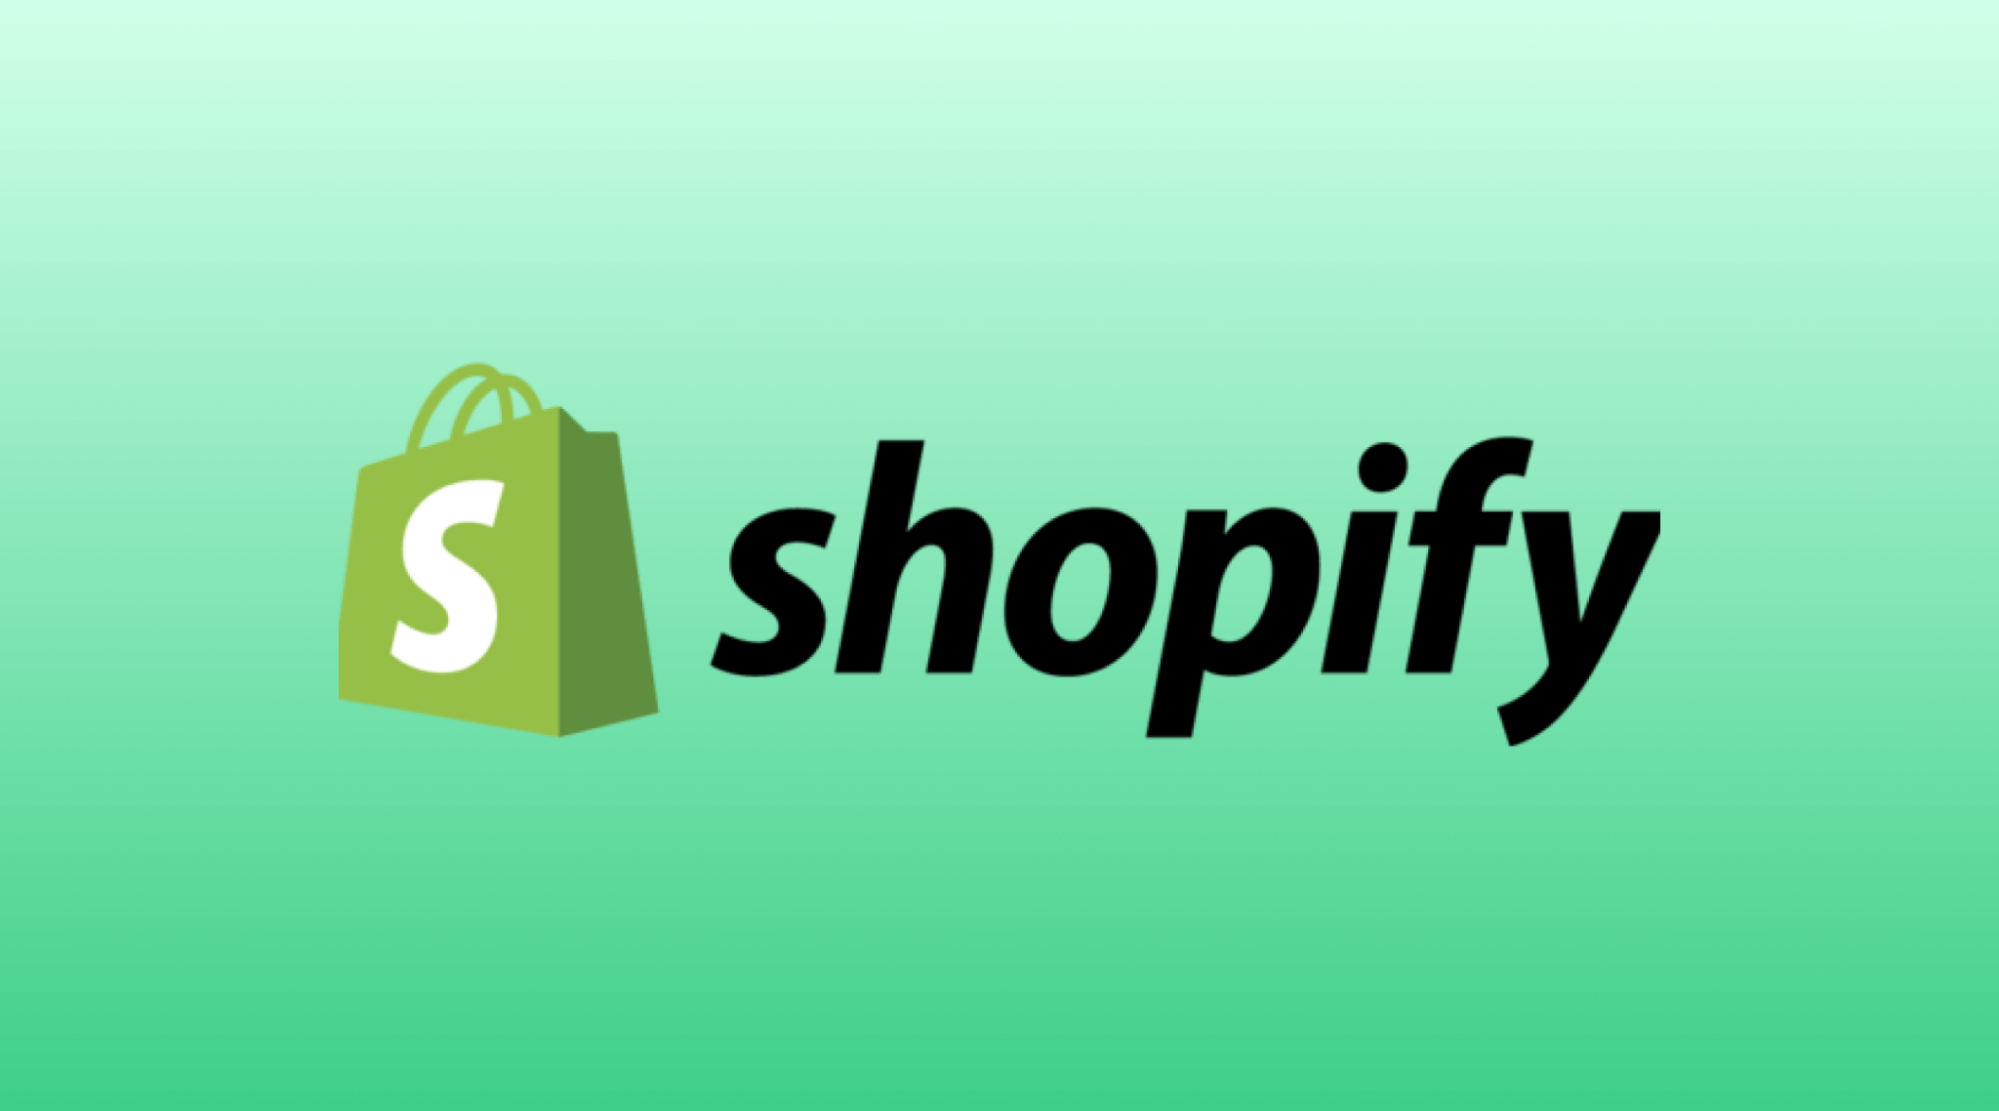 why do you need a Shopify store?